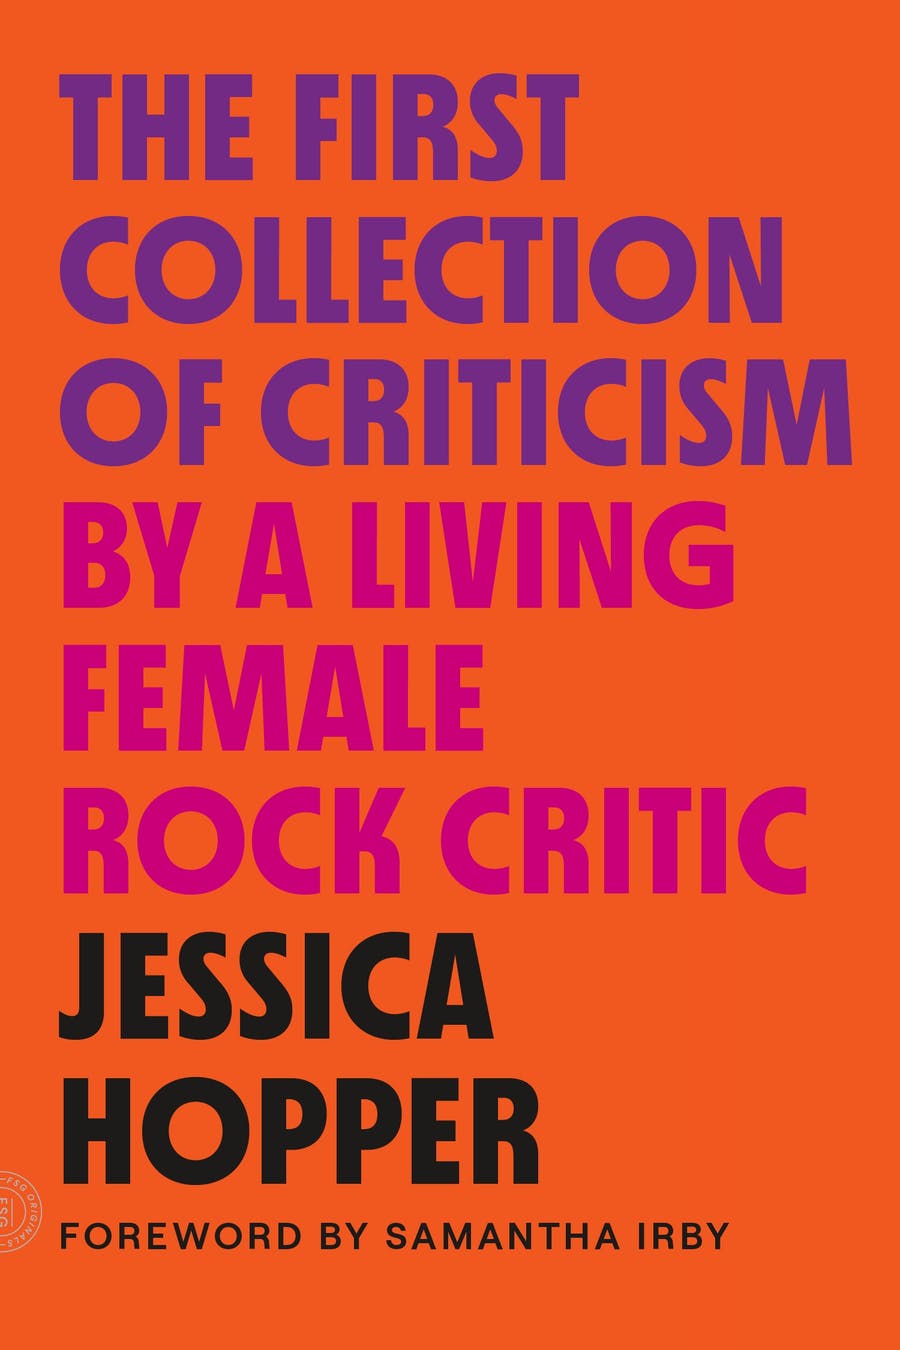 The First Collection of Criticism by a Living Female Rock Critic by Jessica Hopper cover art